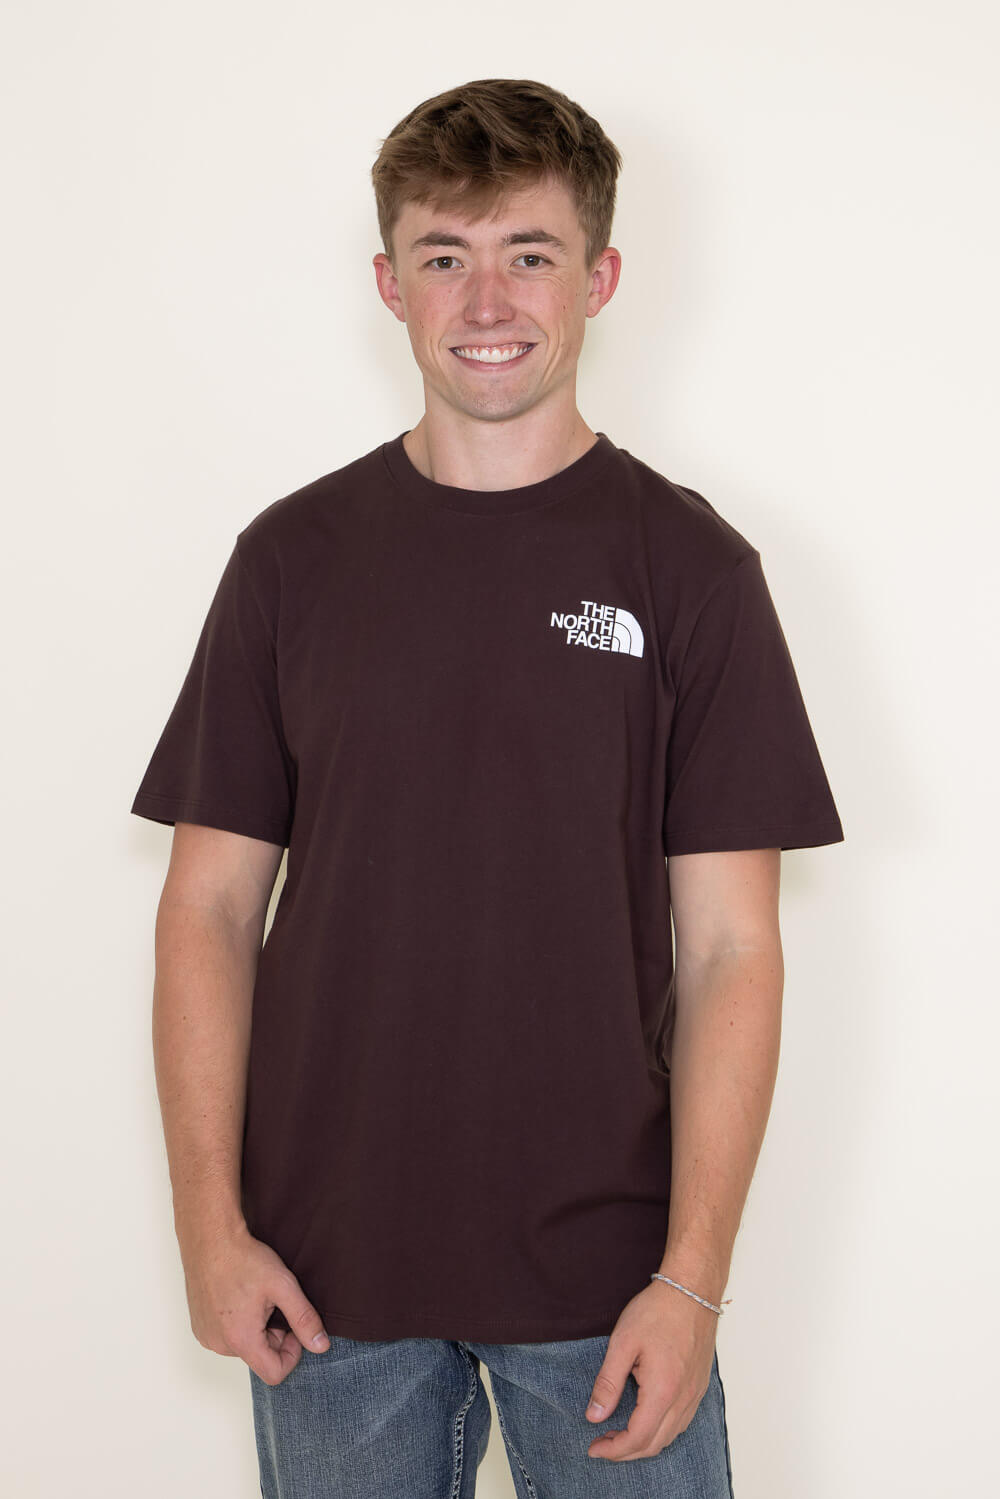 The North Face Men's T-Shirts, the north face men shirt